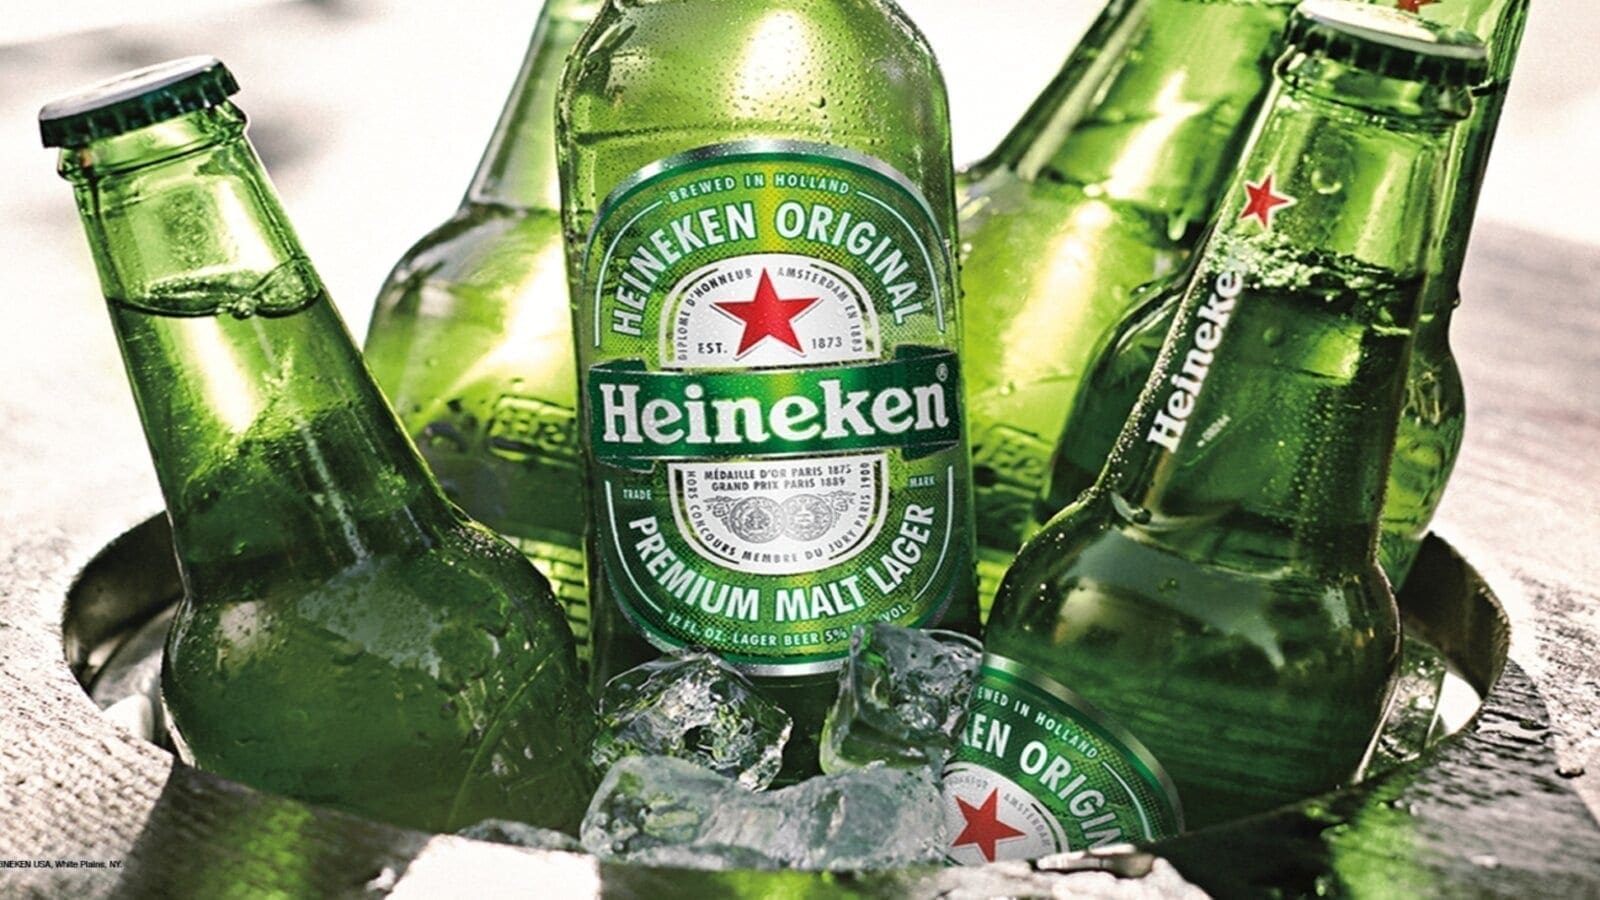 Heineken commits to achieving net zero carbon emissions across entire value chain by 2040